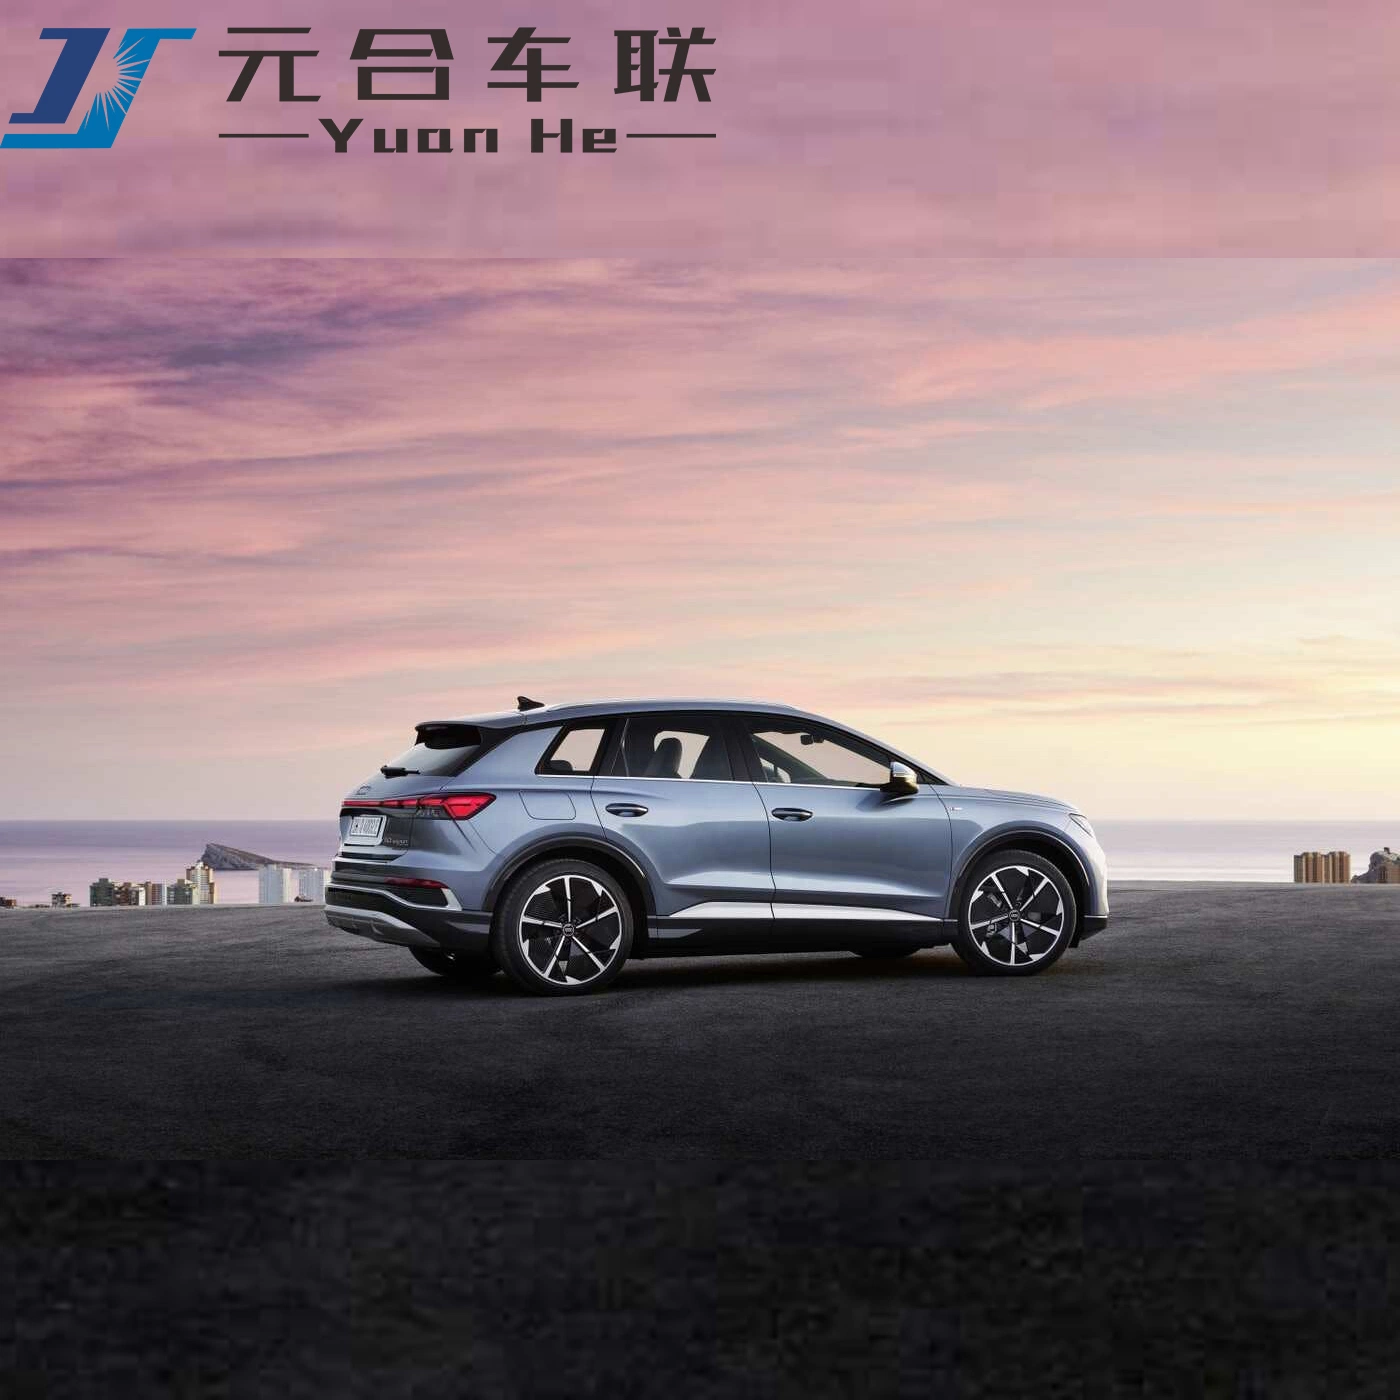 Hot Selling Chinese Auto New Version Audi Q4 E-Tron EV New Energy Car Electric Motor Used Chinese Car